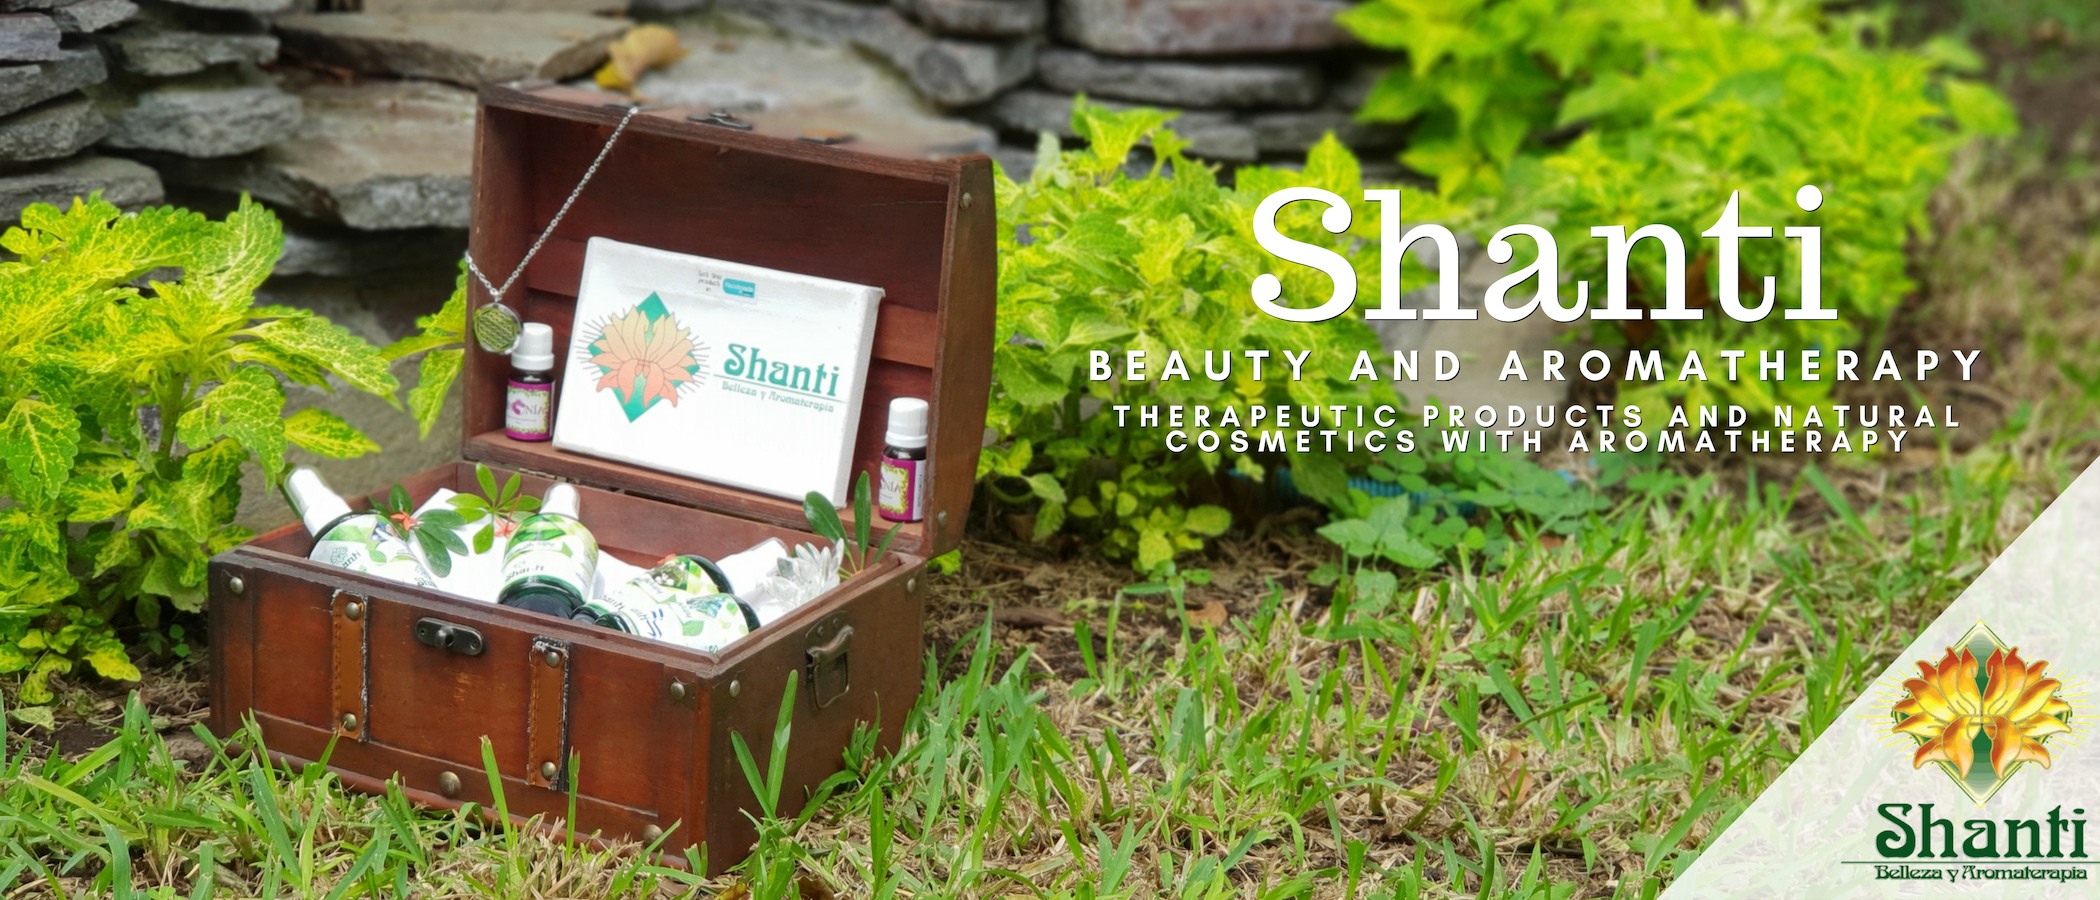 Shanti. Therapeutic Products and Natual Cosmetics with Aromatherapy